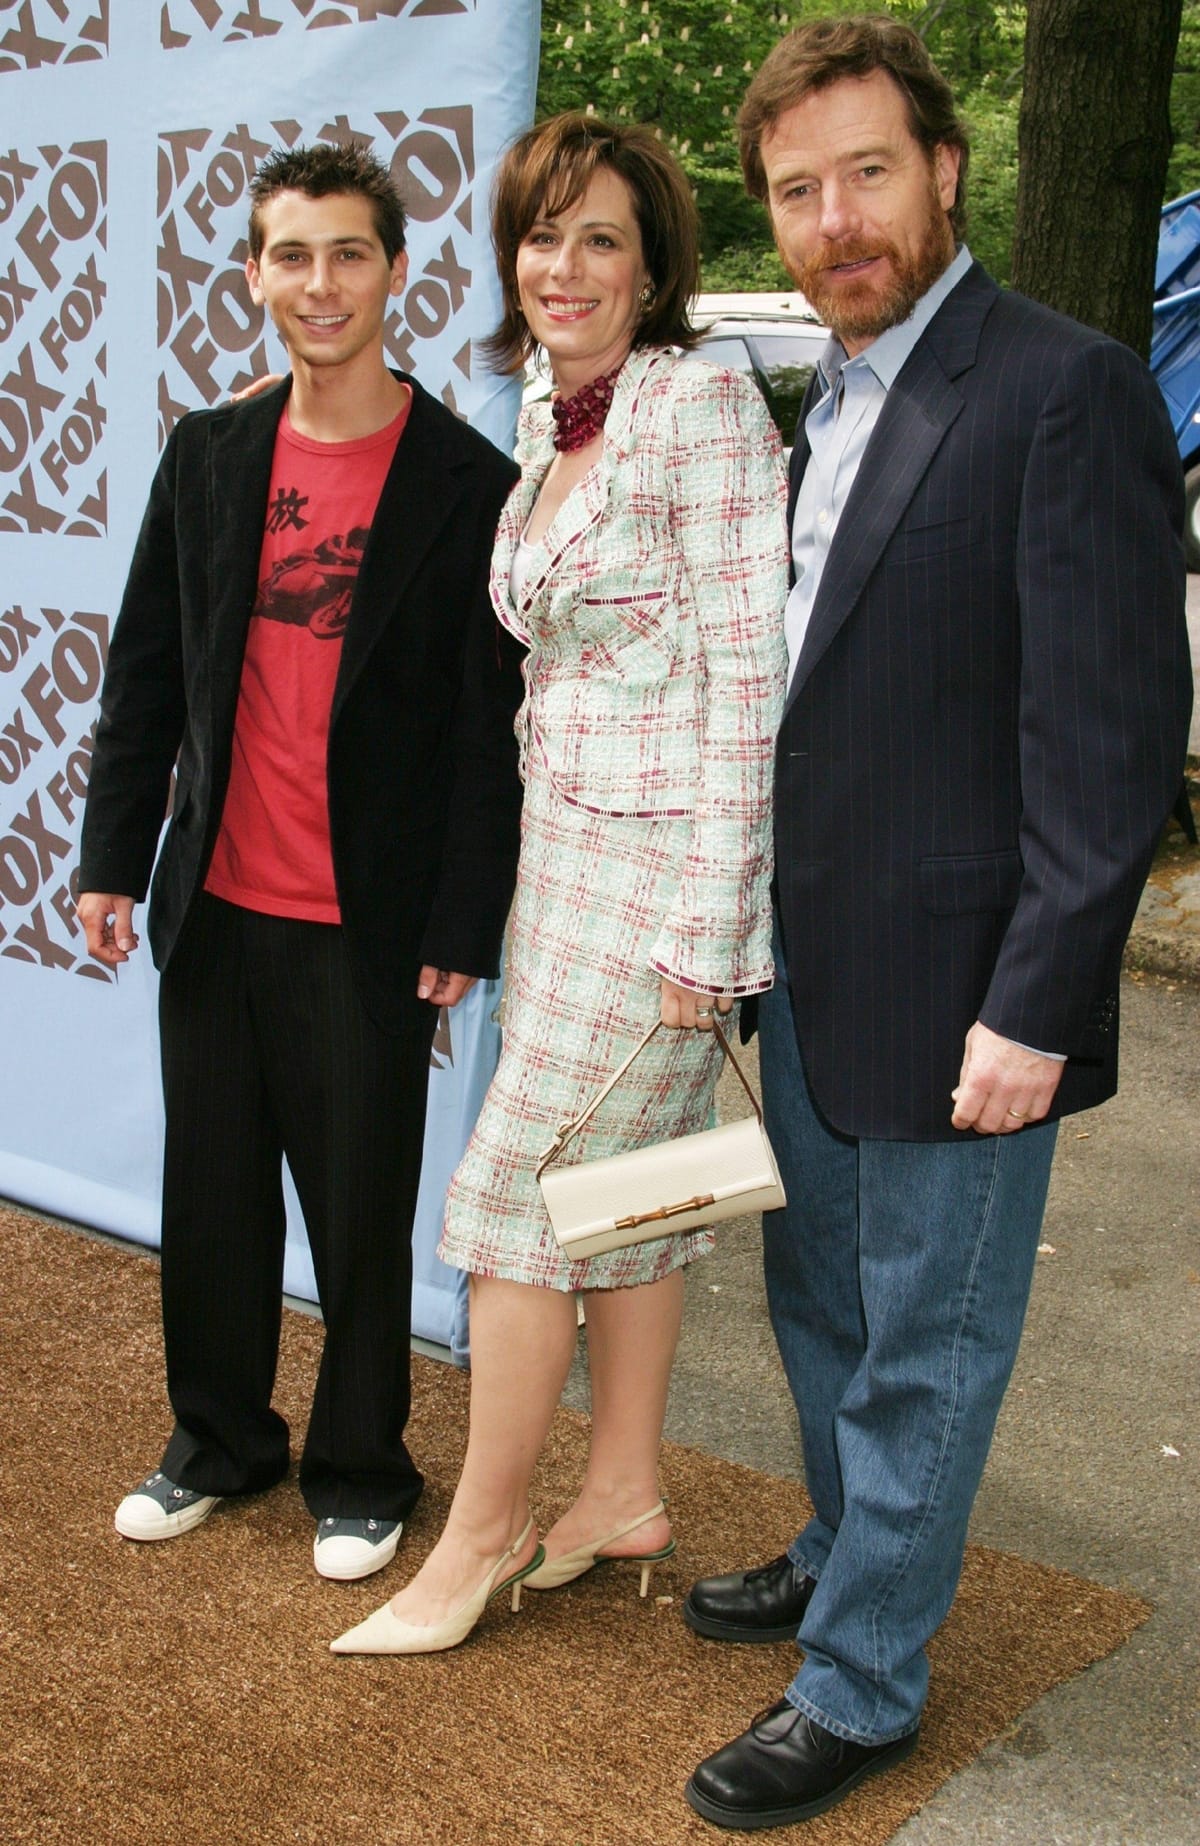 Bryan Cranston with his Malcolm in the Middle co-stars Frankie Muniz and Jane Kaczmarek in 2005